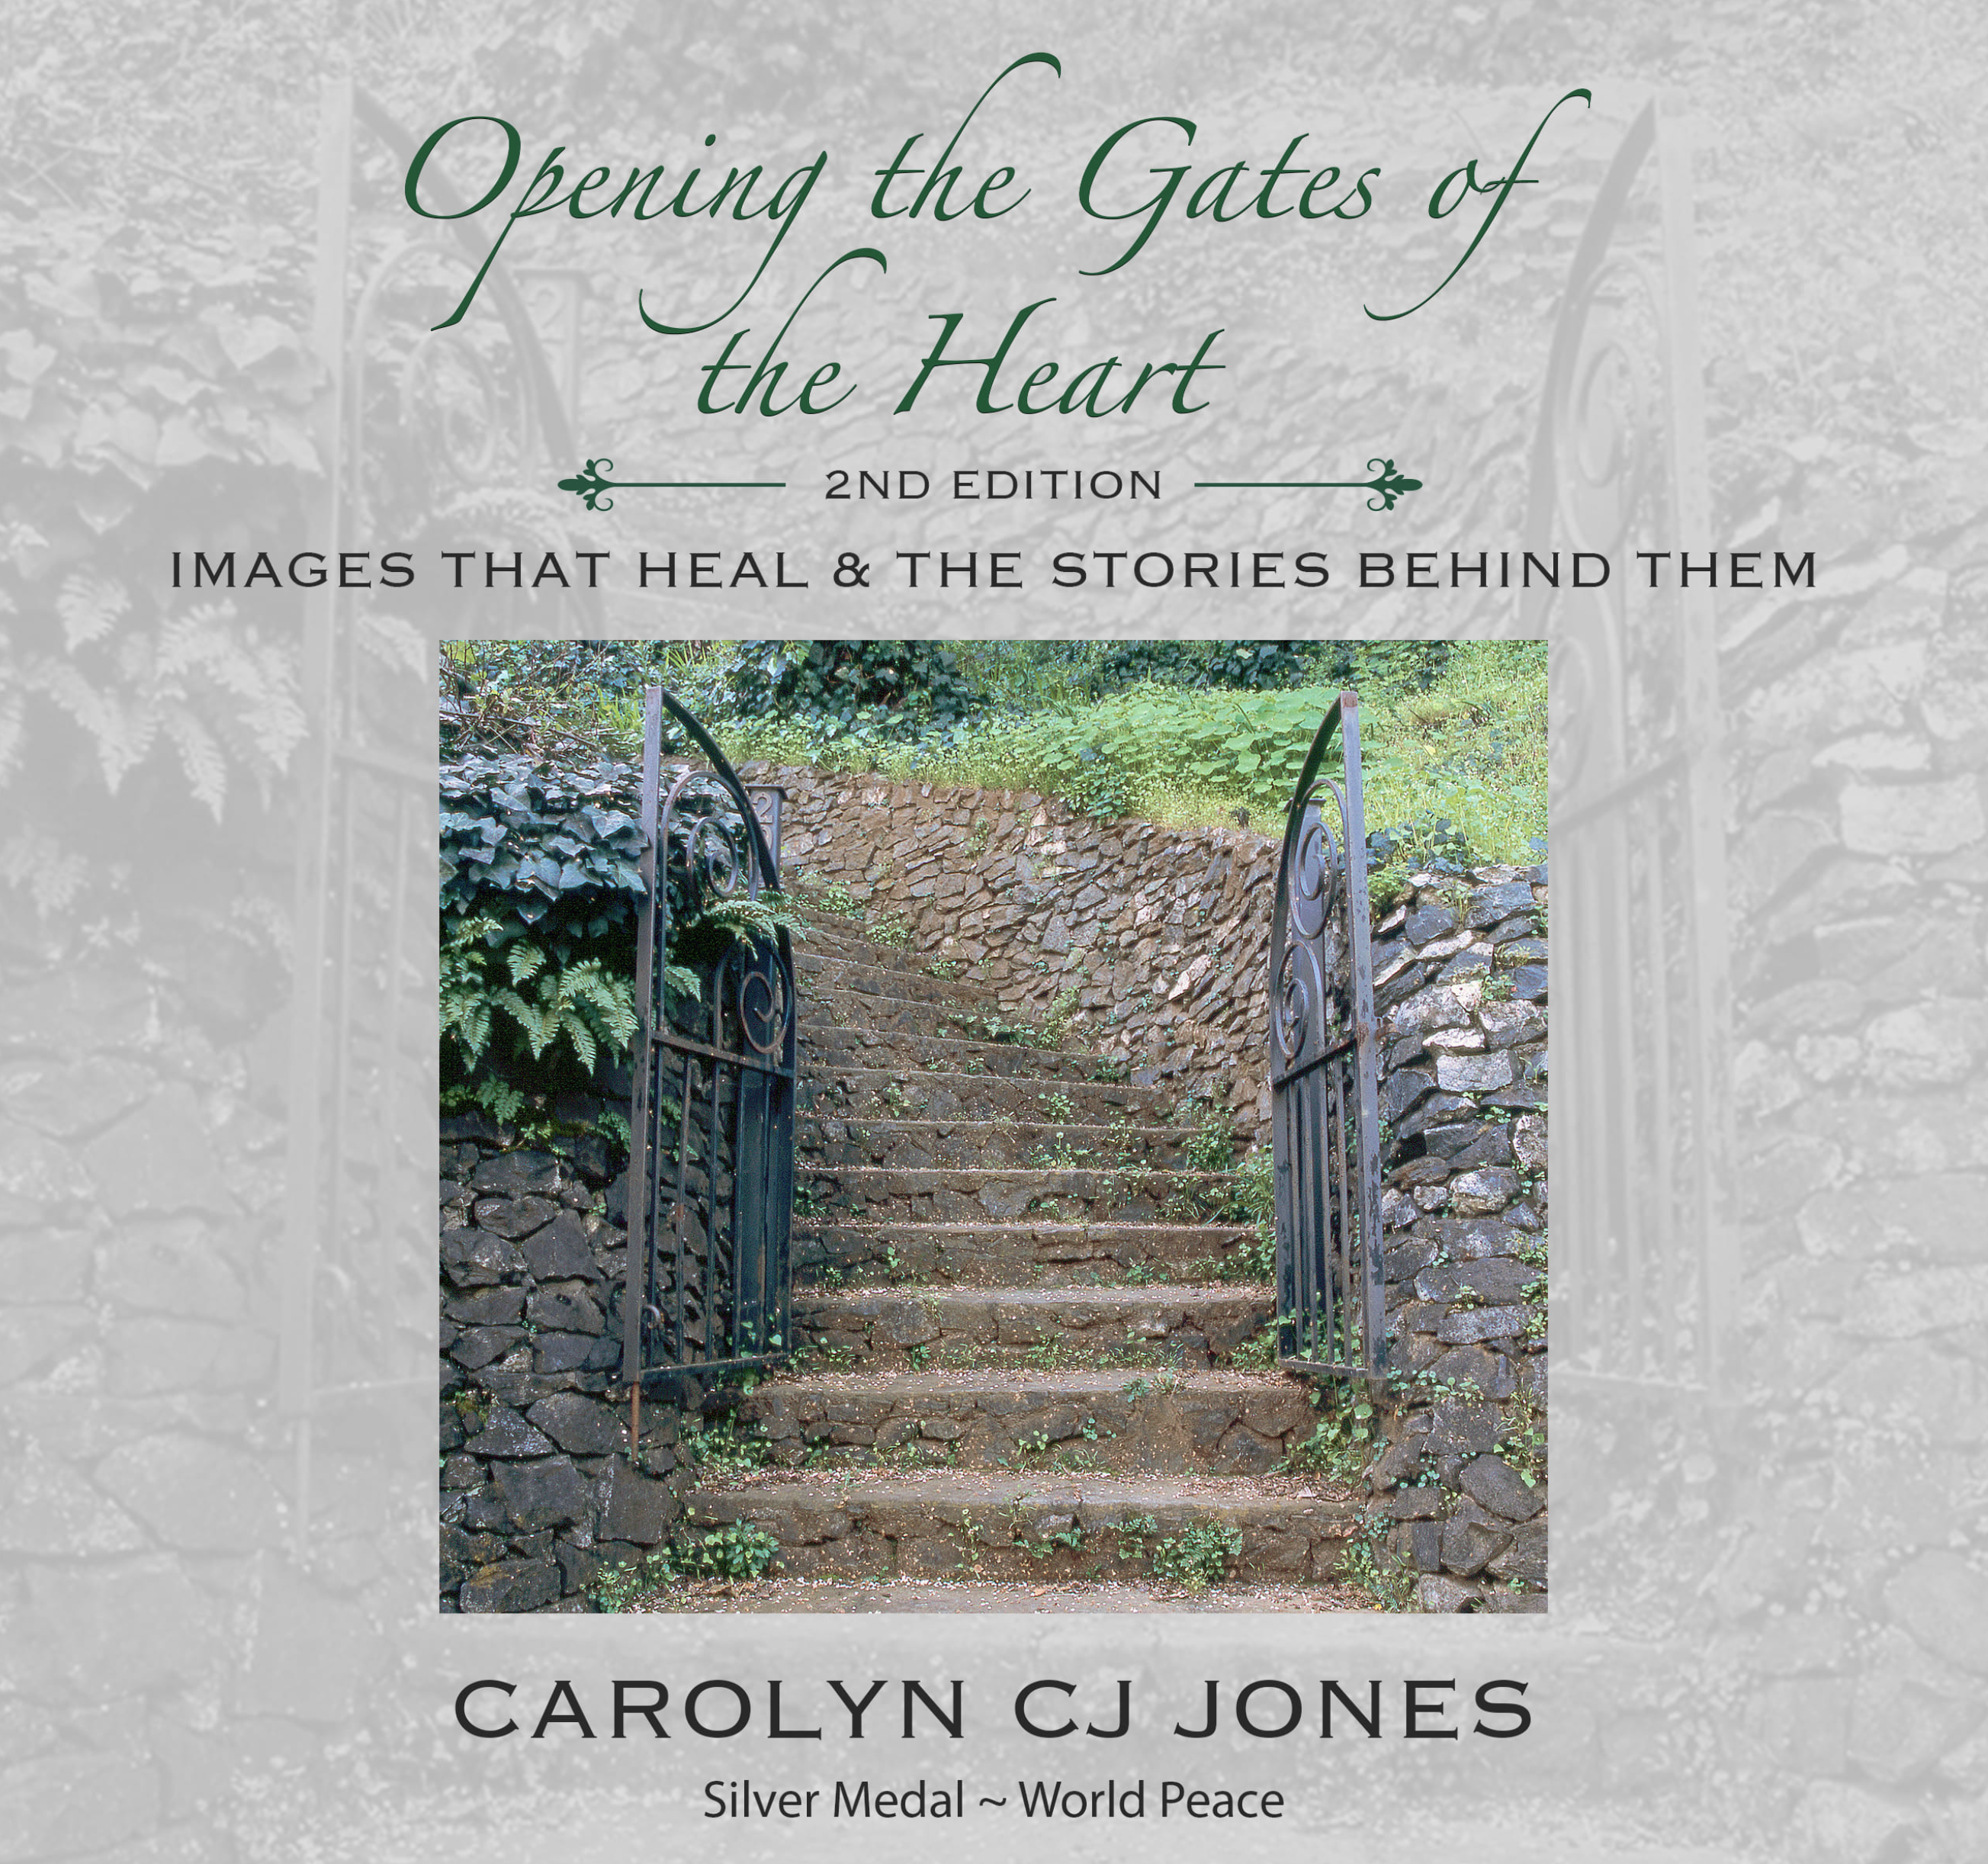 Opening the Gates of the Heart: A Journey of Healing